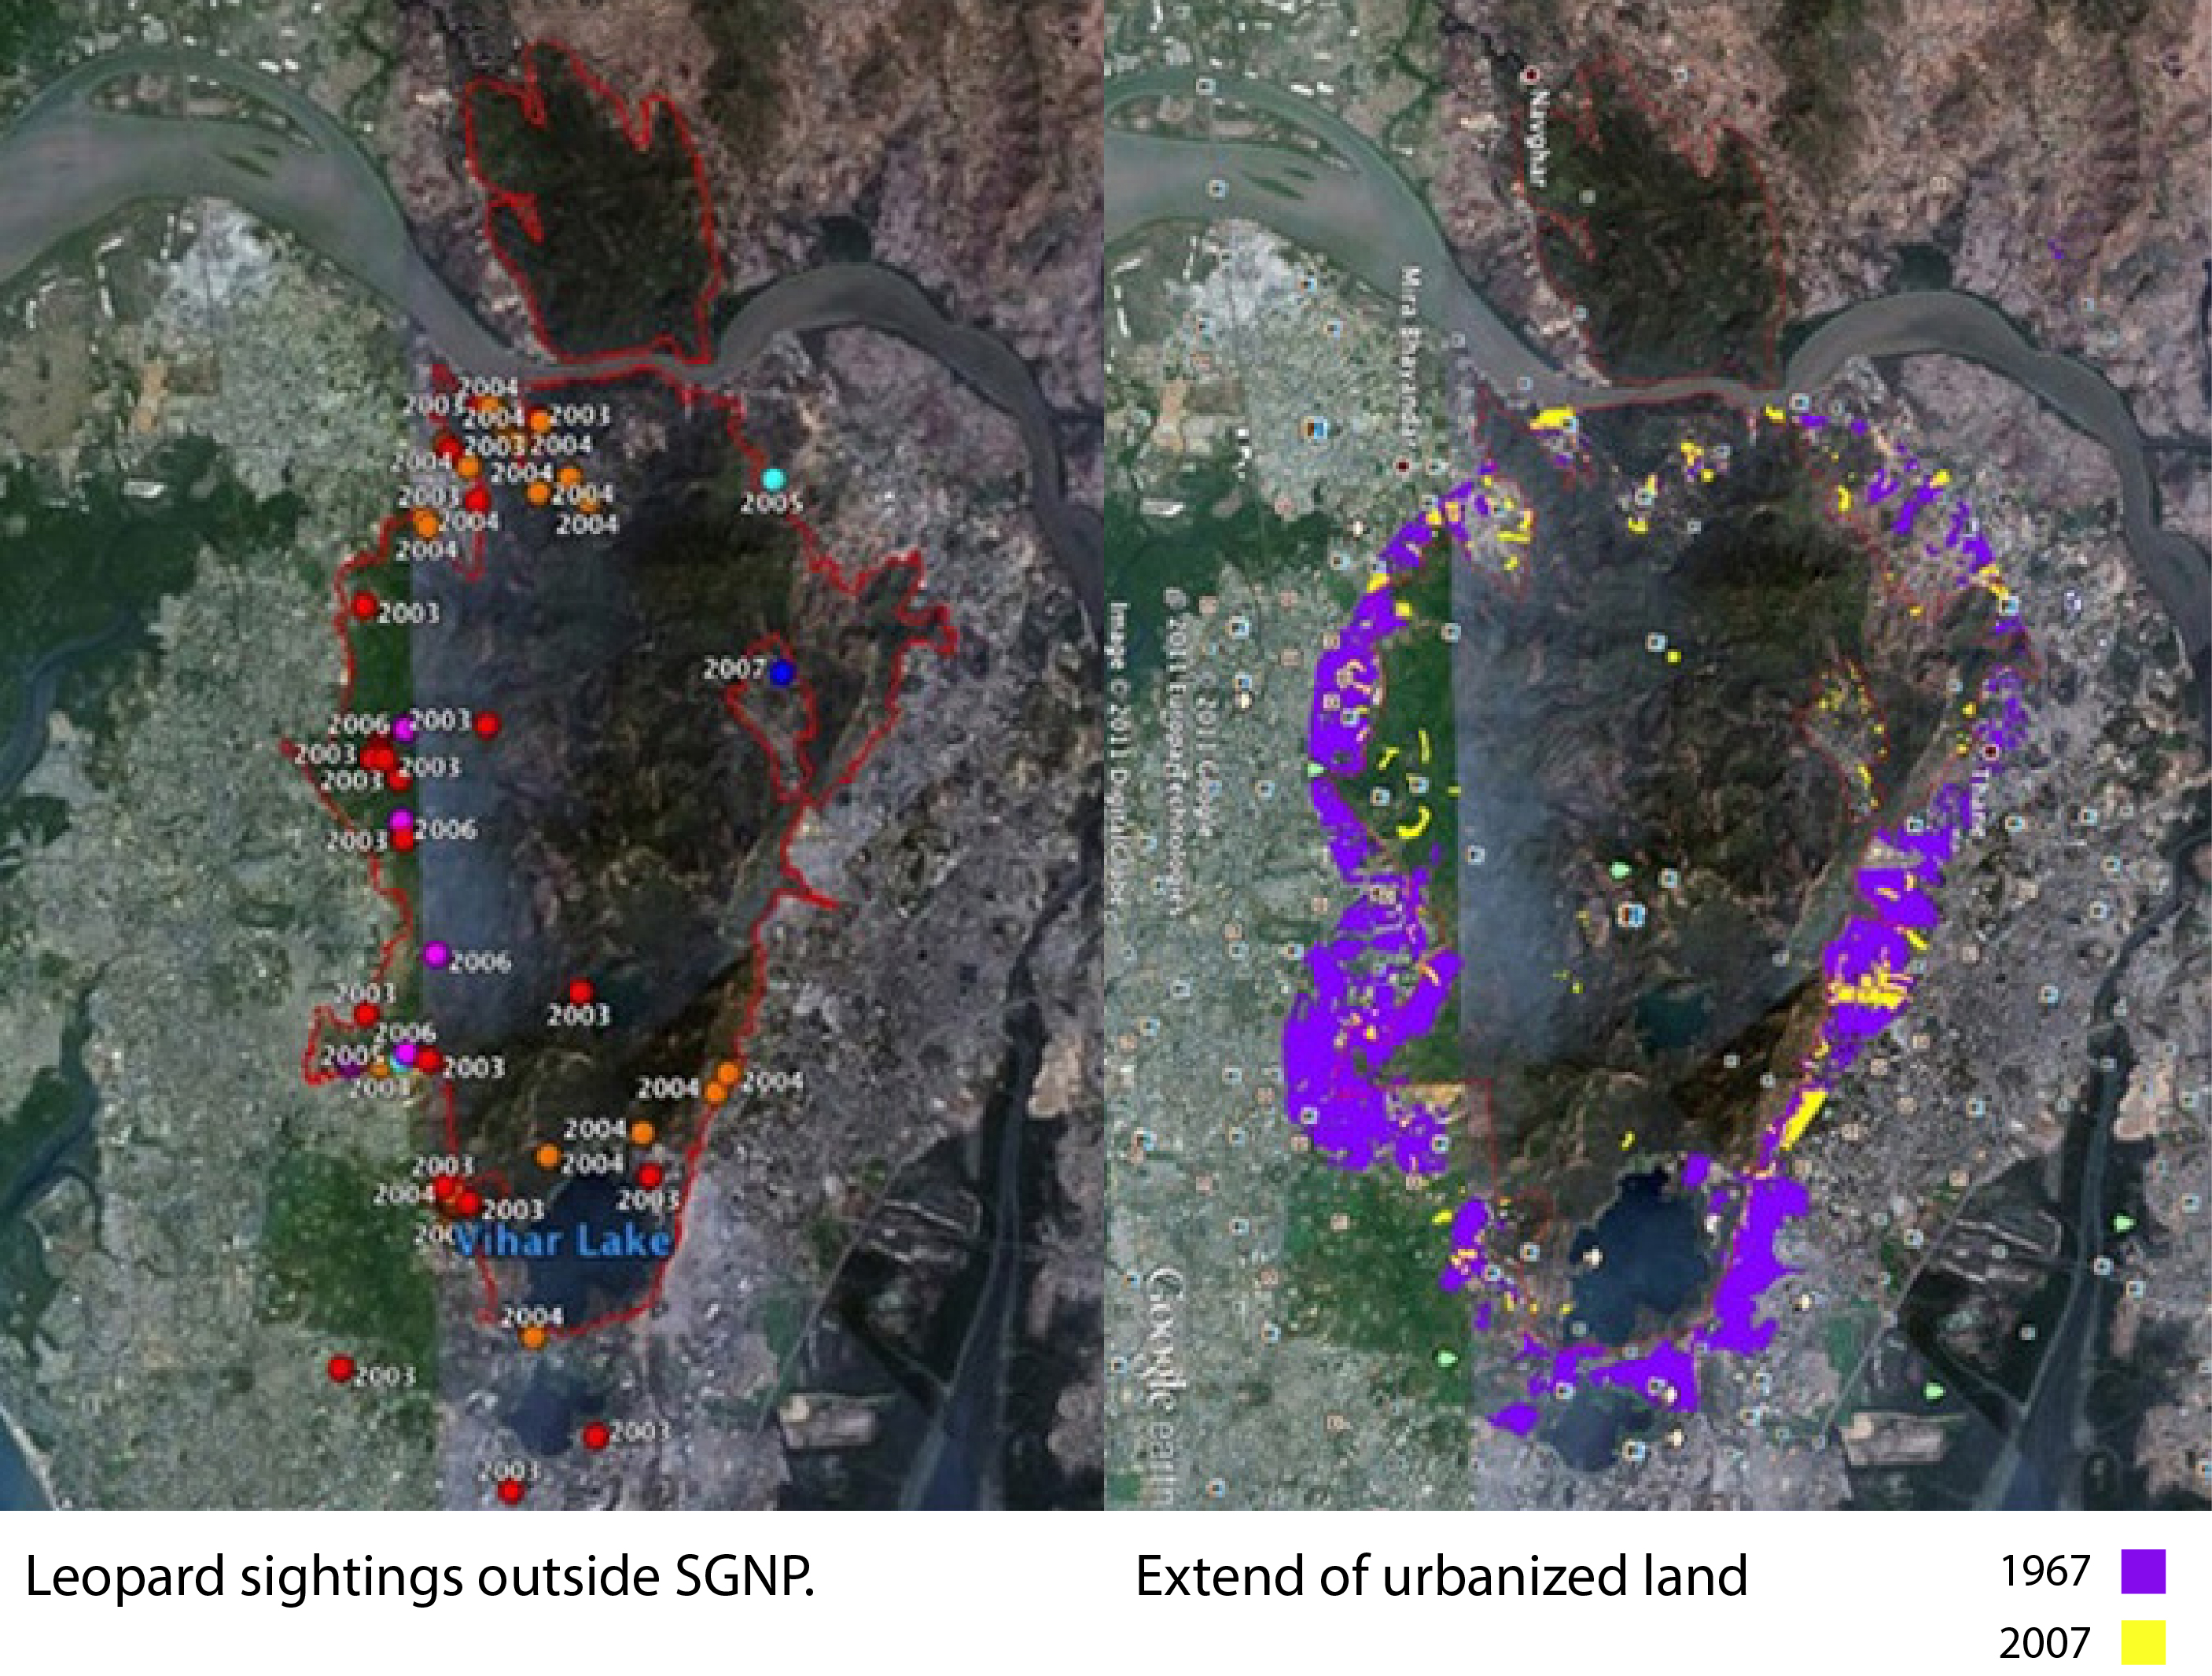 (Left) Map of leopard sightings from 2003-2004. (Right) Urban growth around the park from 1967-2007.